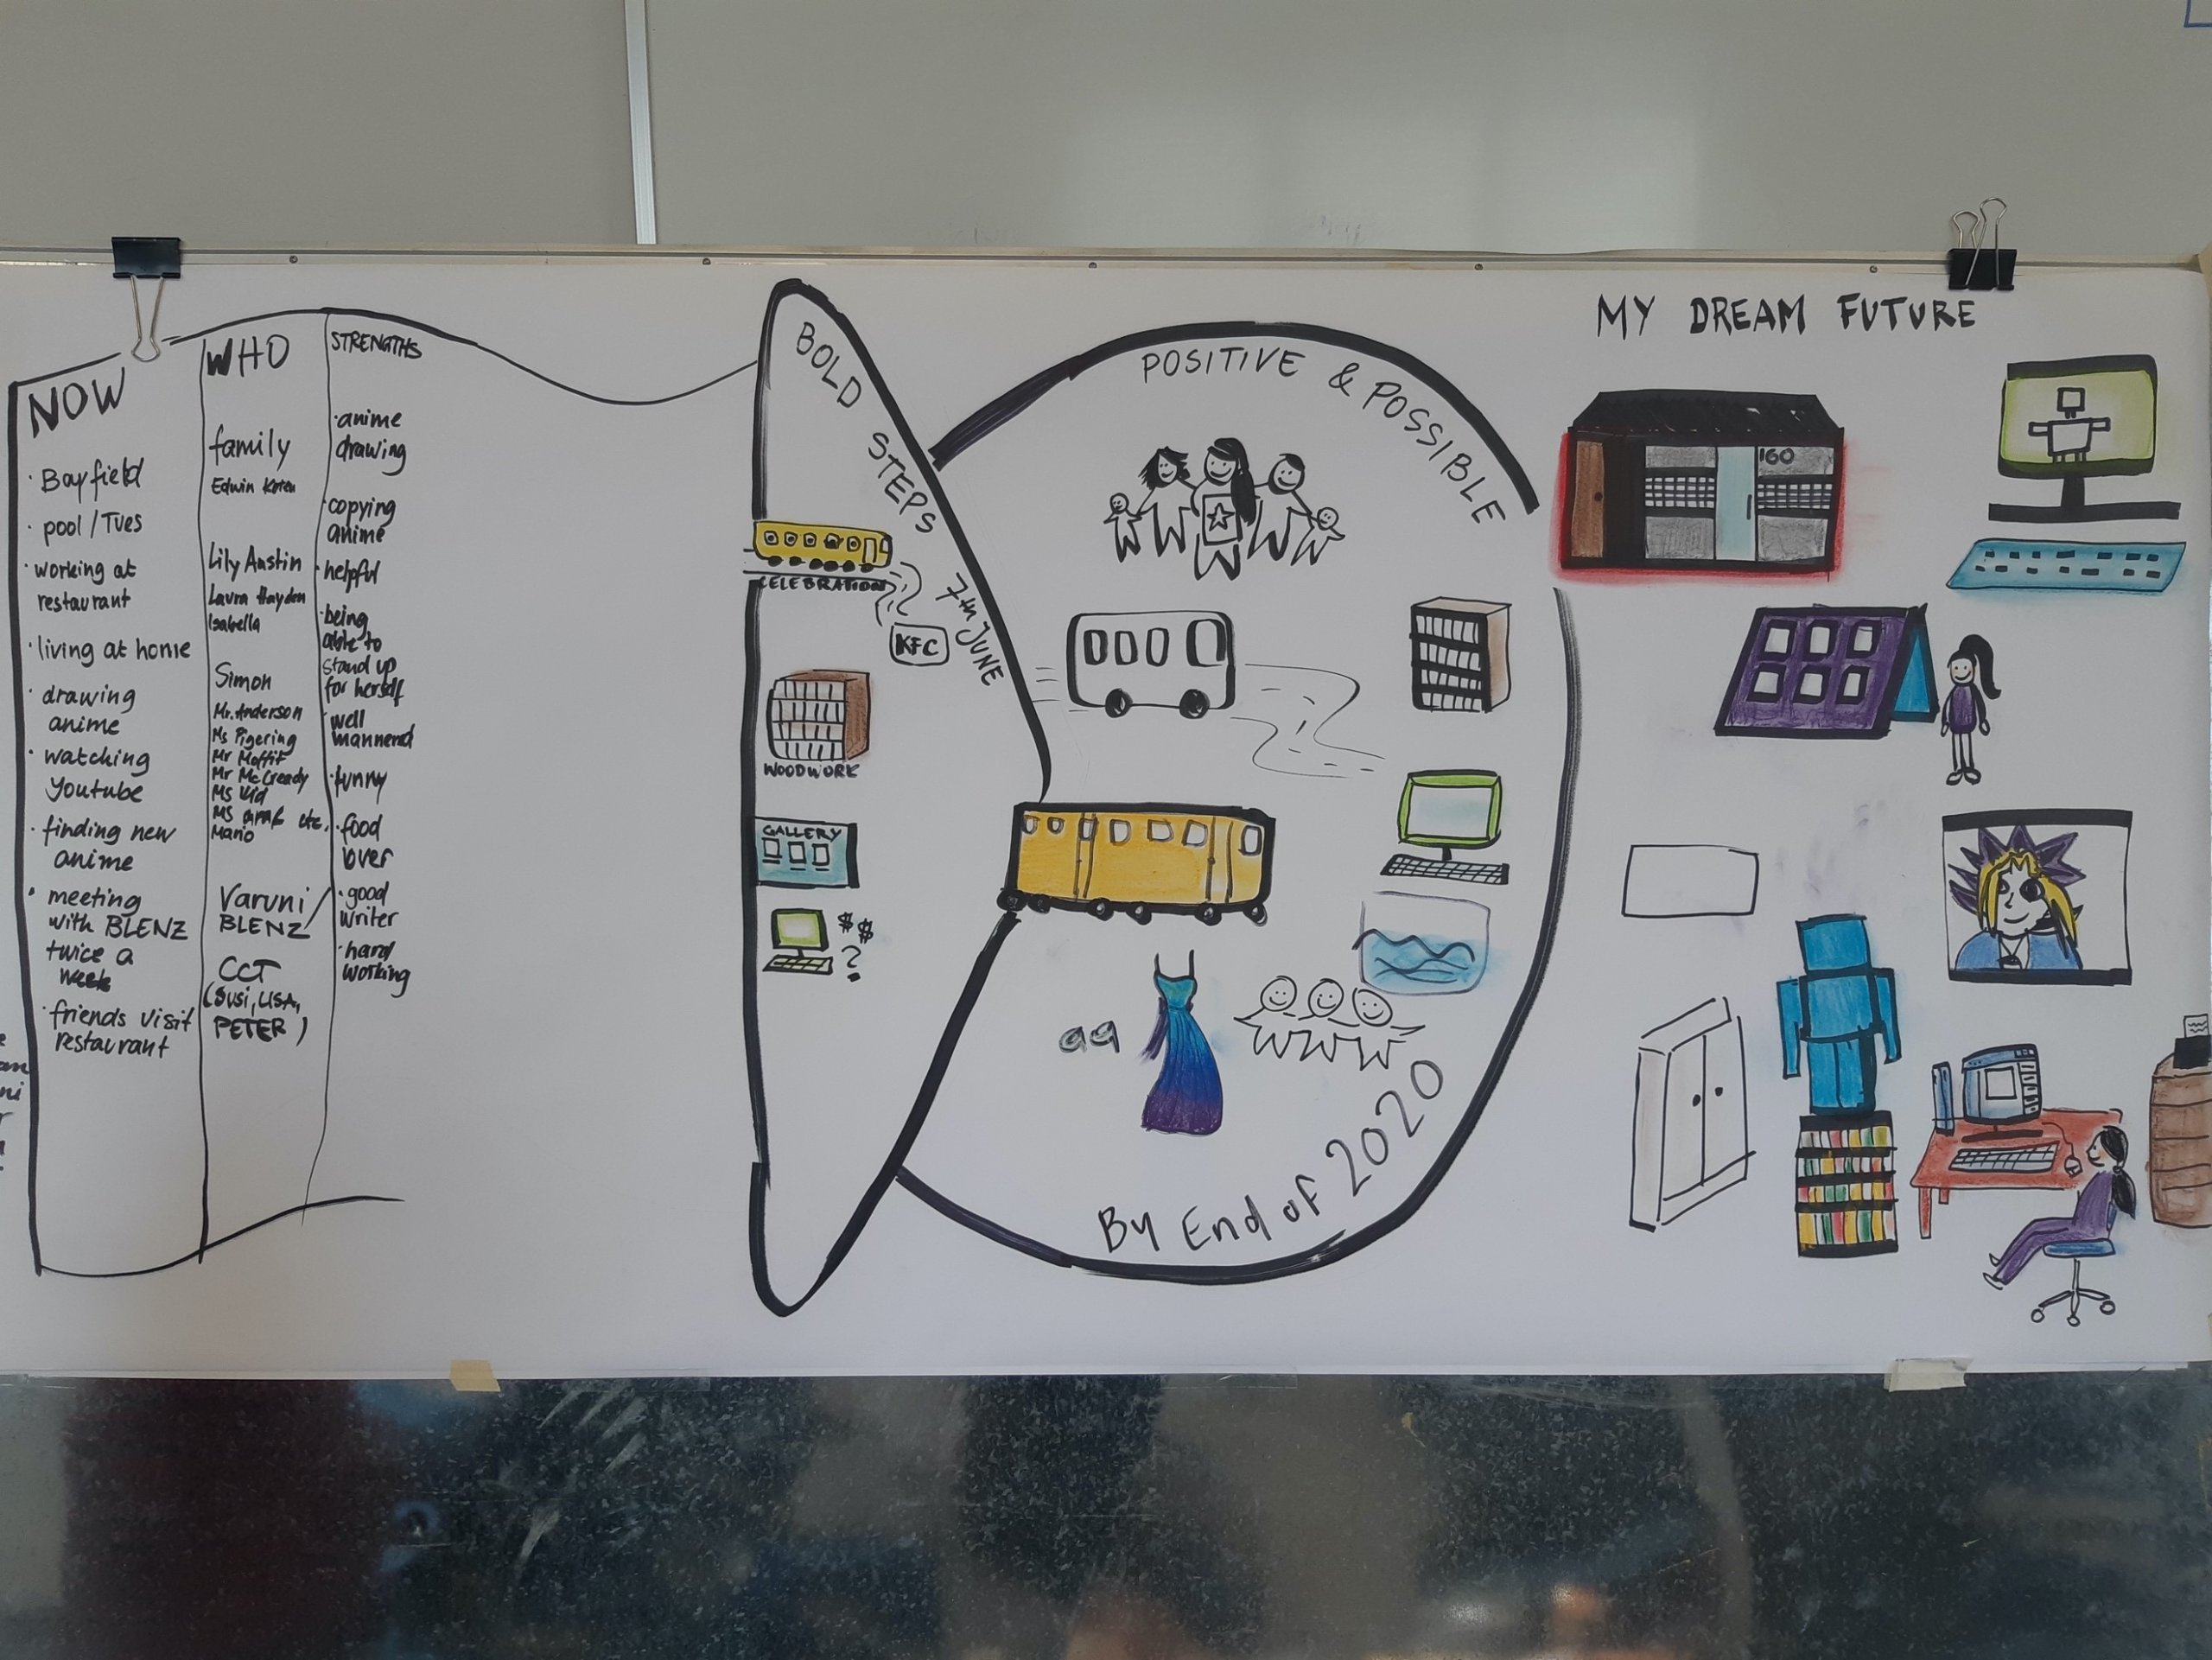 Figure 1 - A students cardboard written and drawn plan for her future path